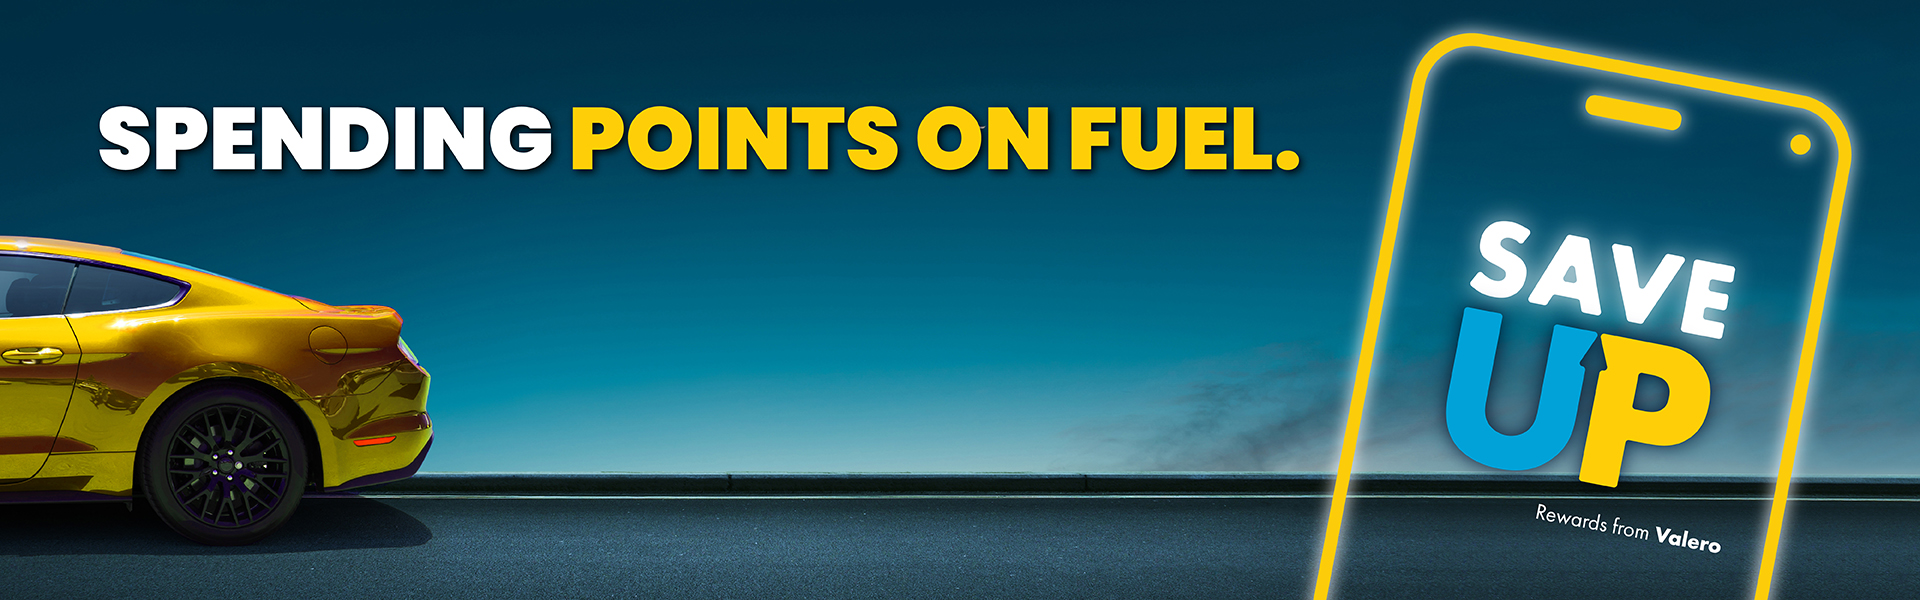 Spend your points on fuel*